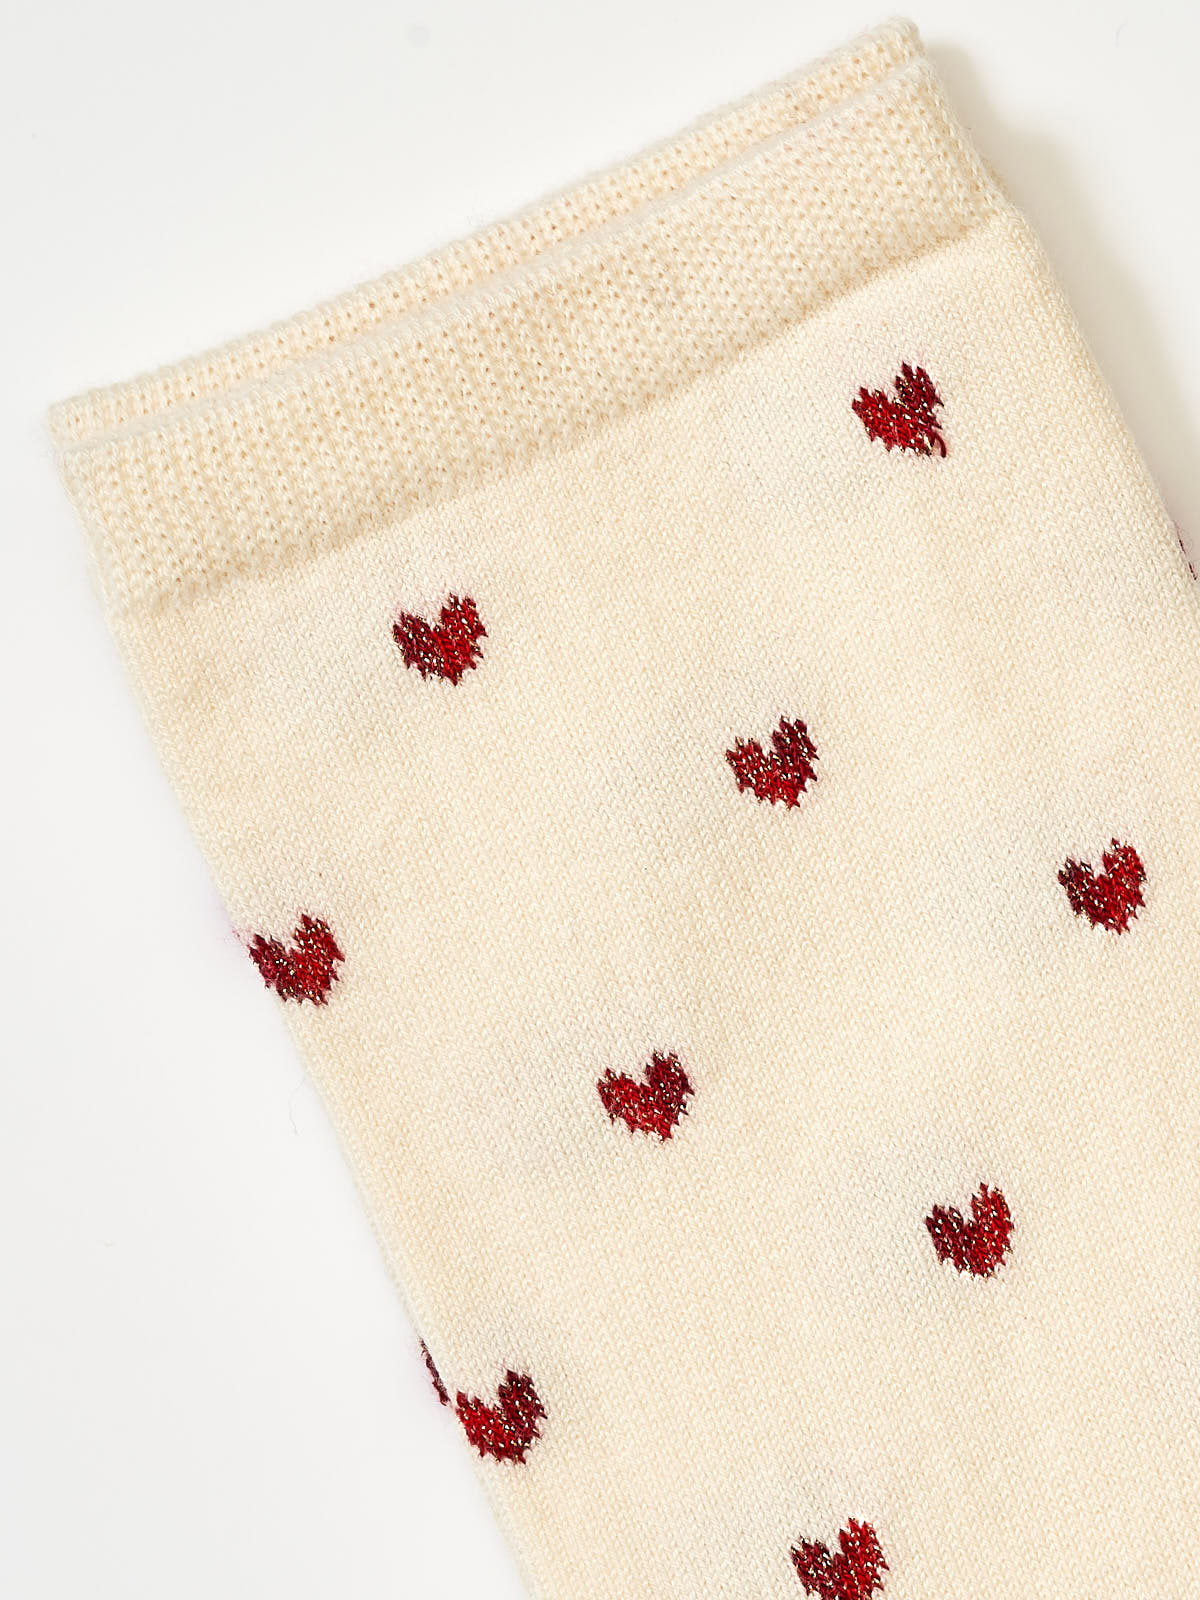 Chaussettes motif coeur LOVE brillantes, ROYALTIES, made in France